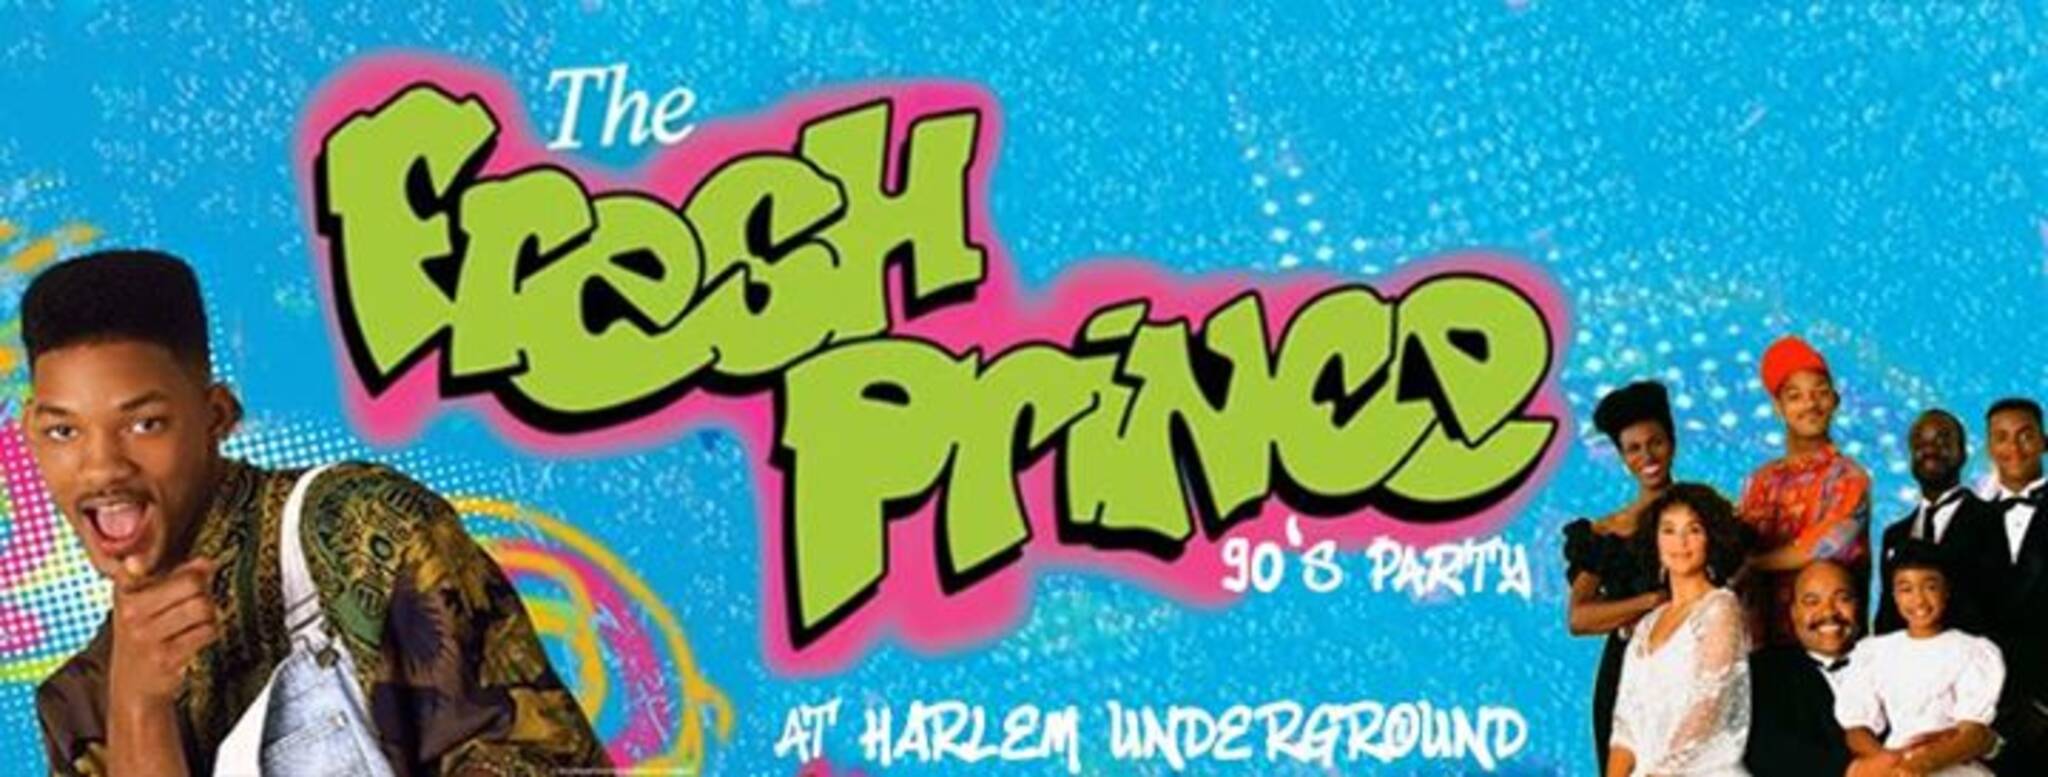 Fresh Prince 90's Party